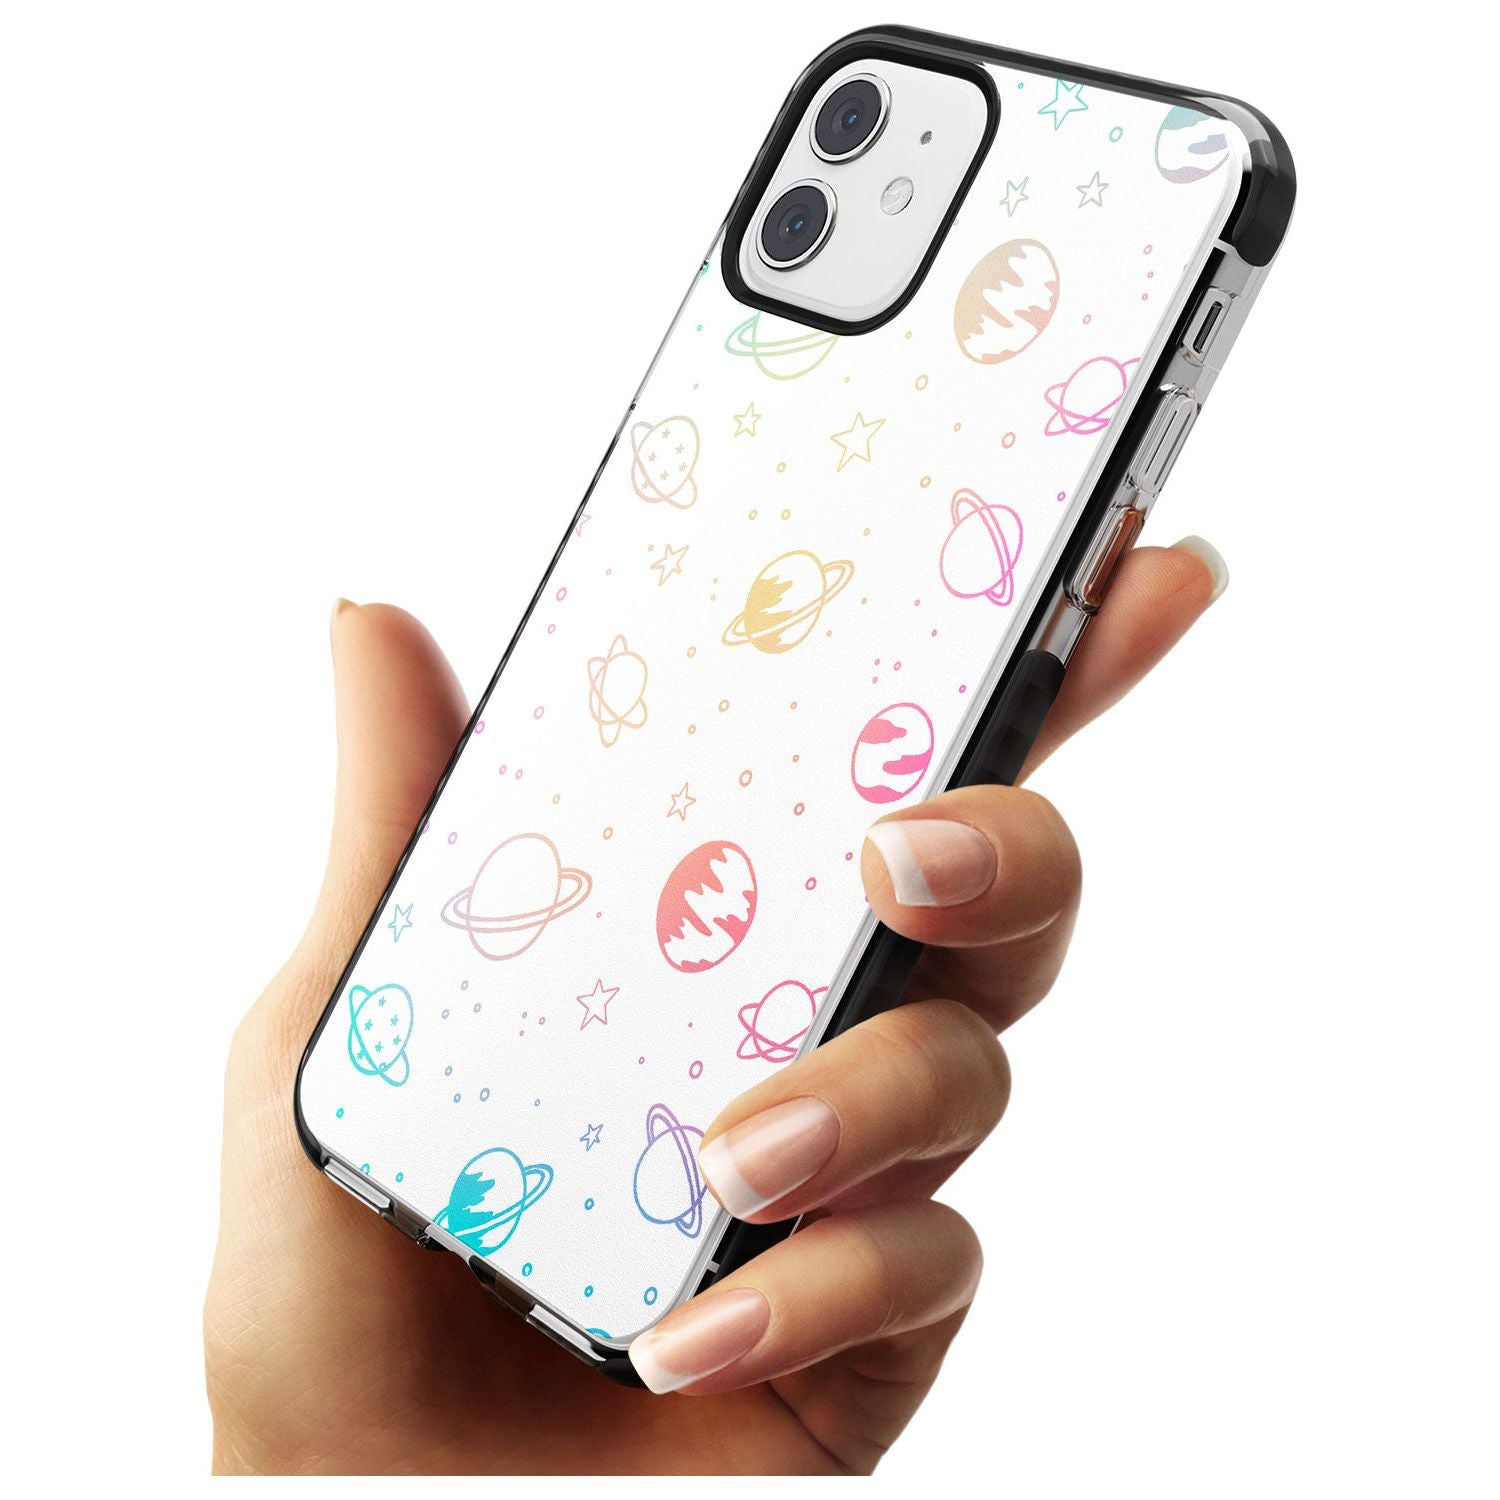 Outer Space Outlines: Pastels on White Pink Fade Impact Phone Case for iPhone 11 Pro Max